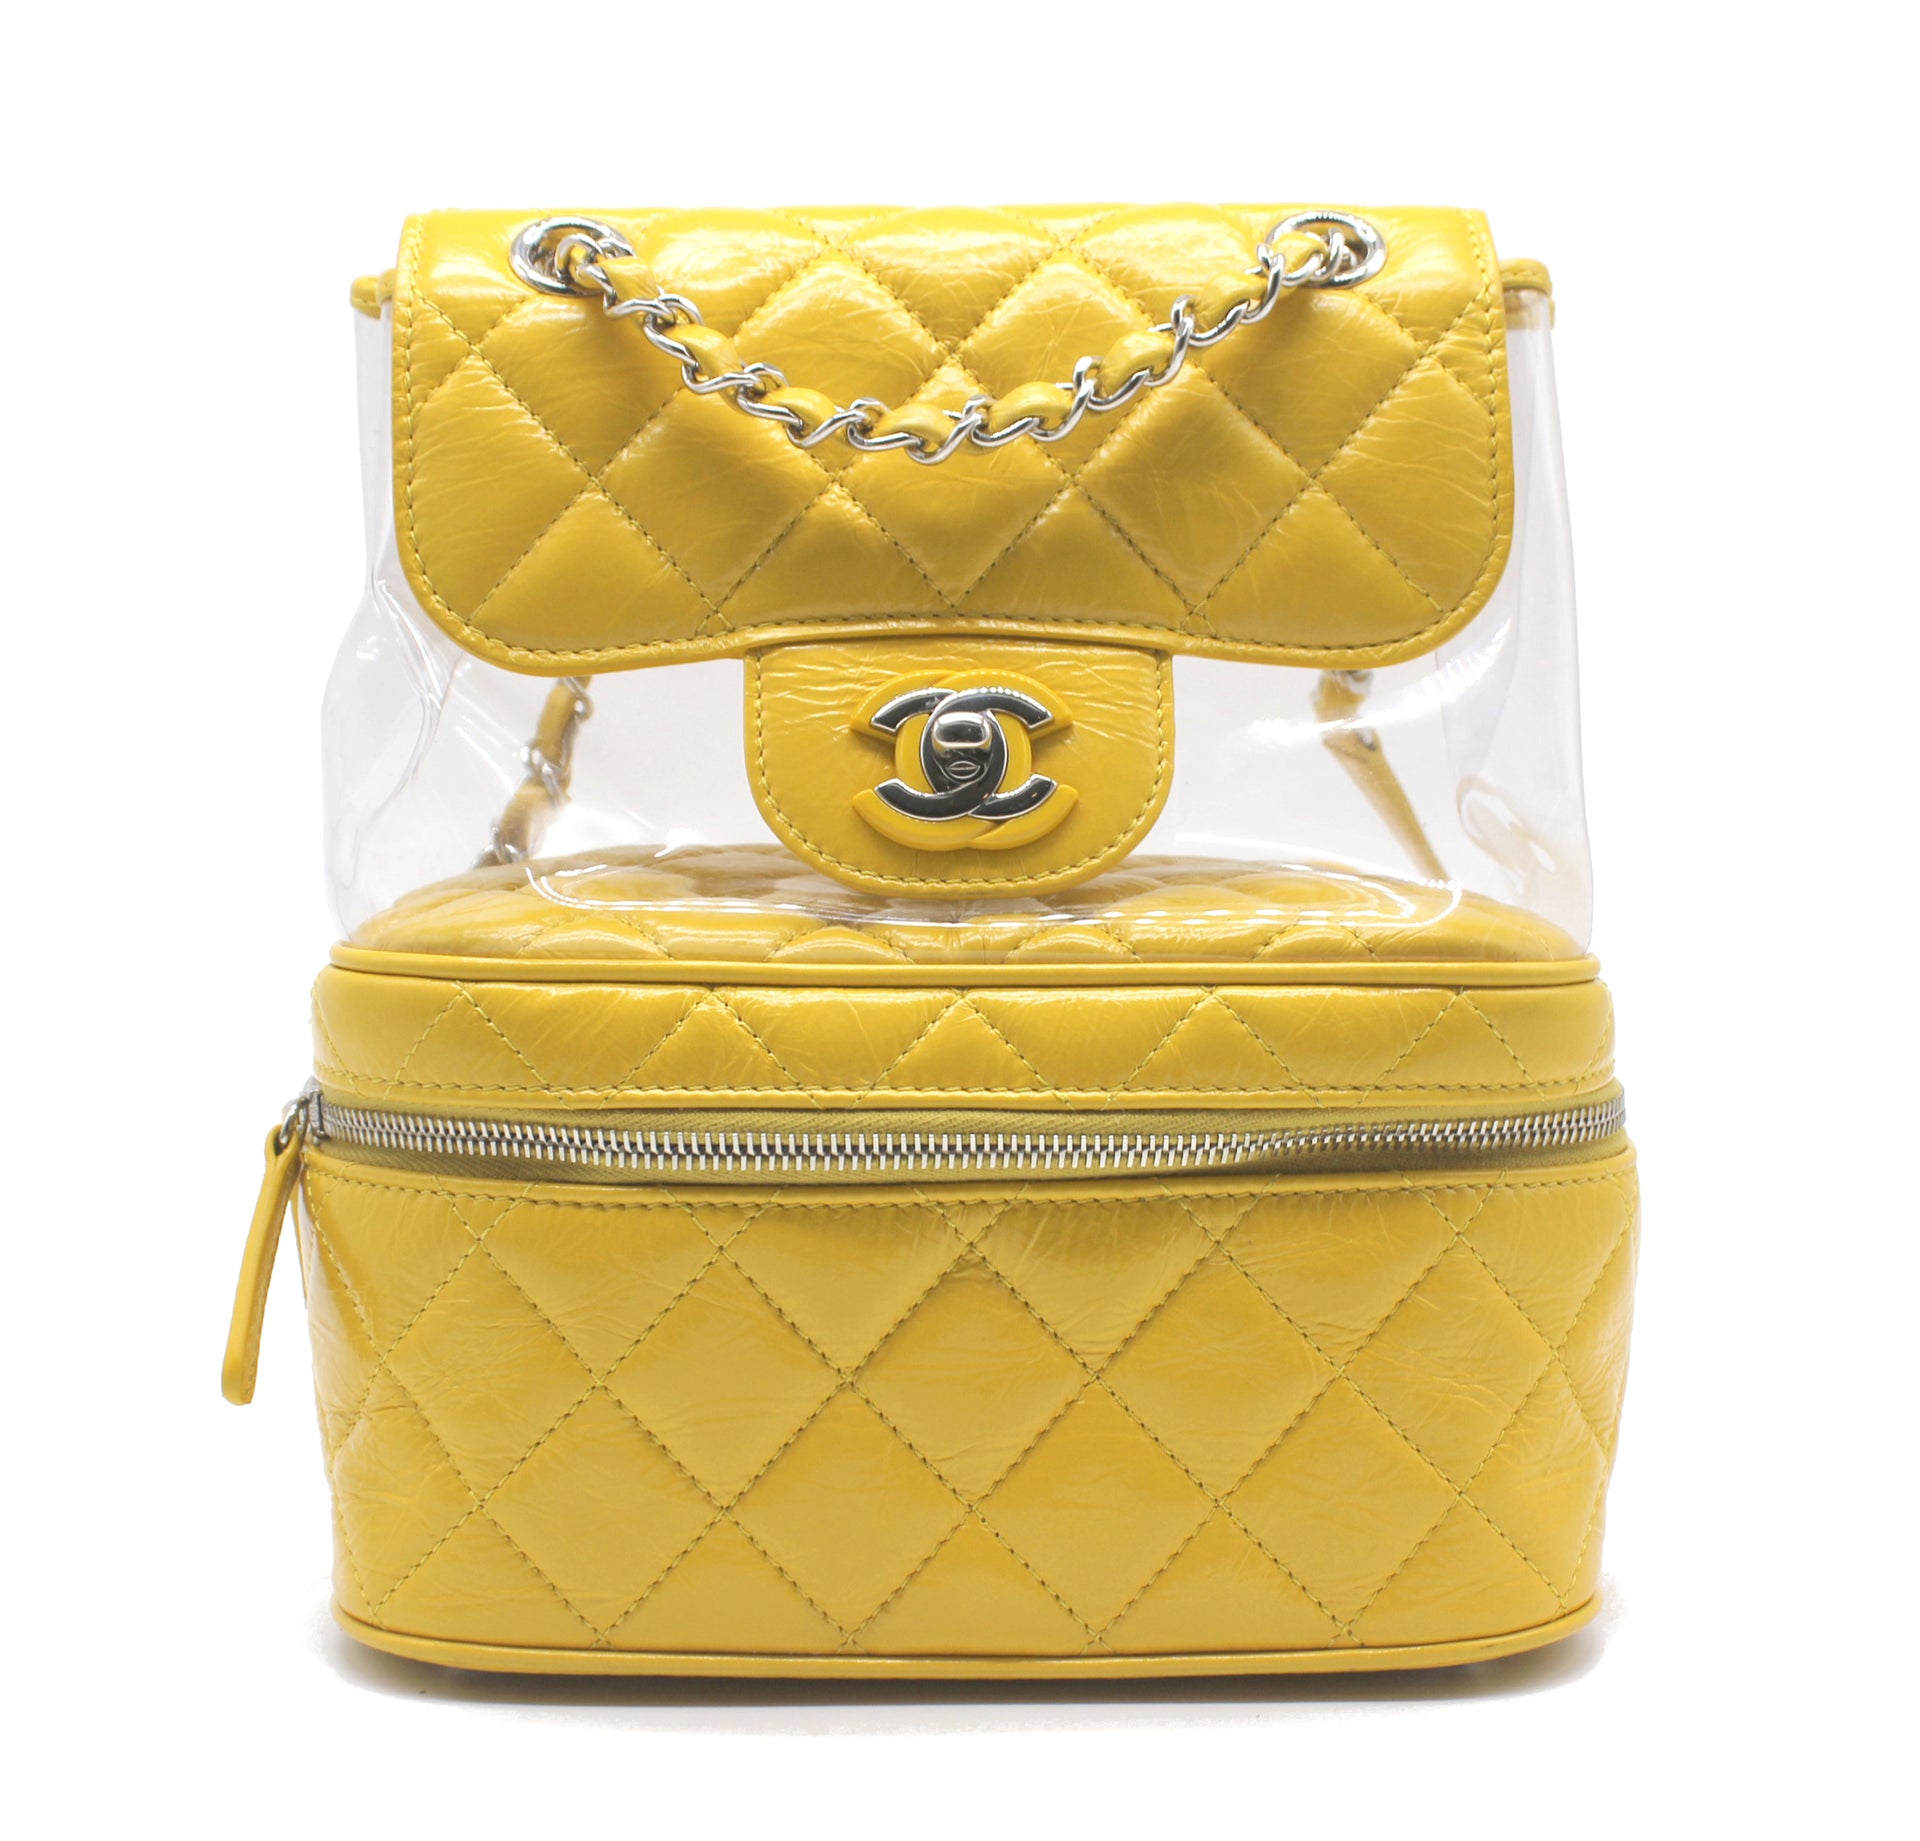 Chanel Classic Flap Crumpled Vanity and Resin Yellow Leather Pvc Backpack